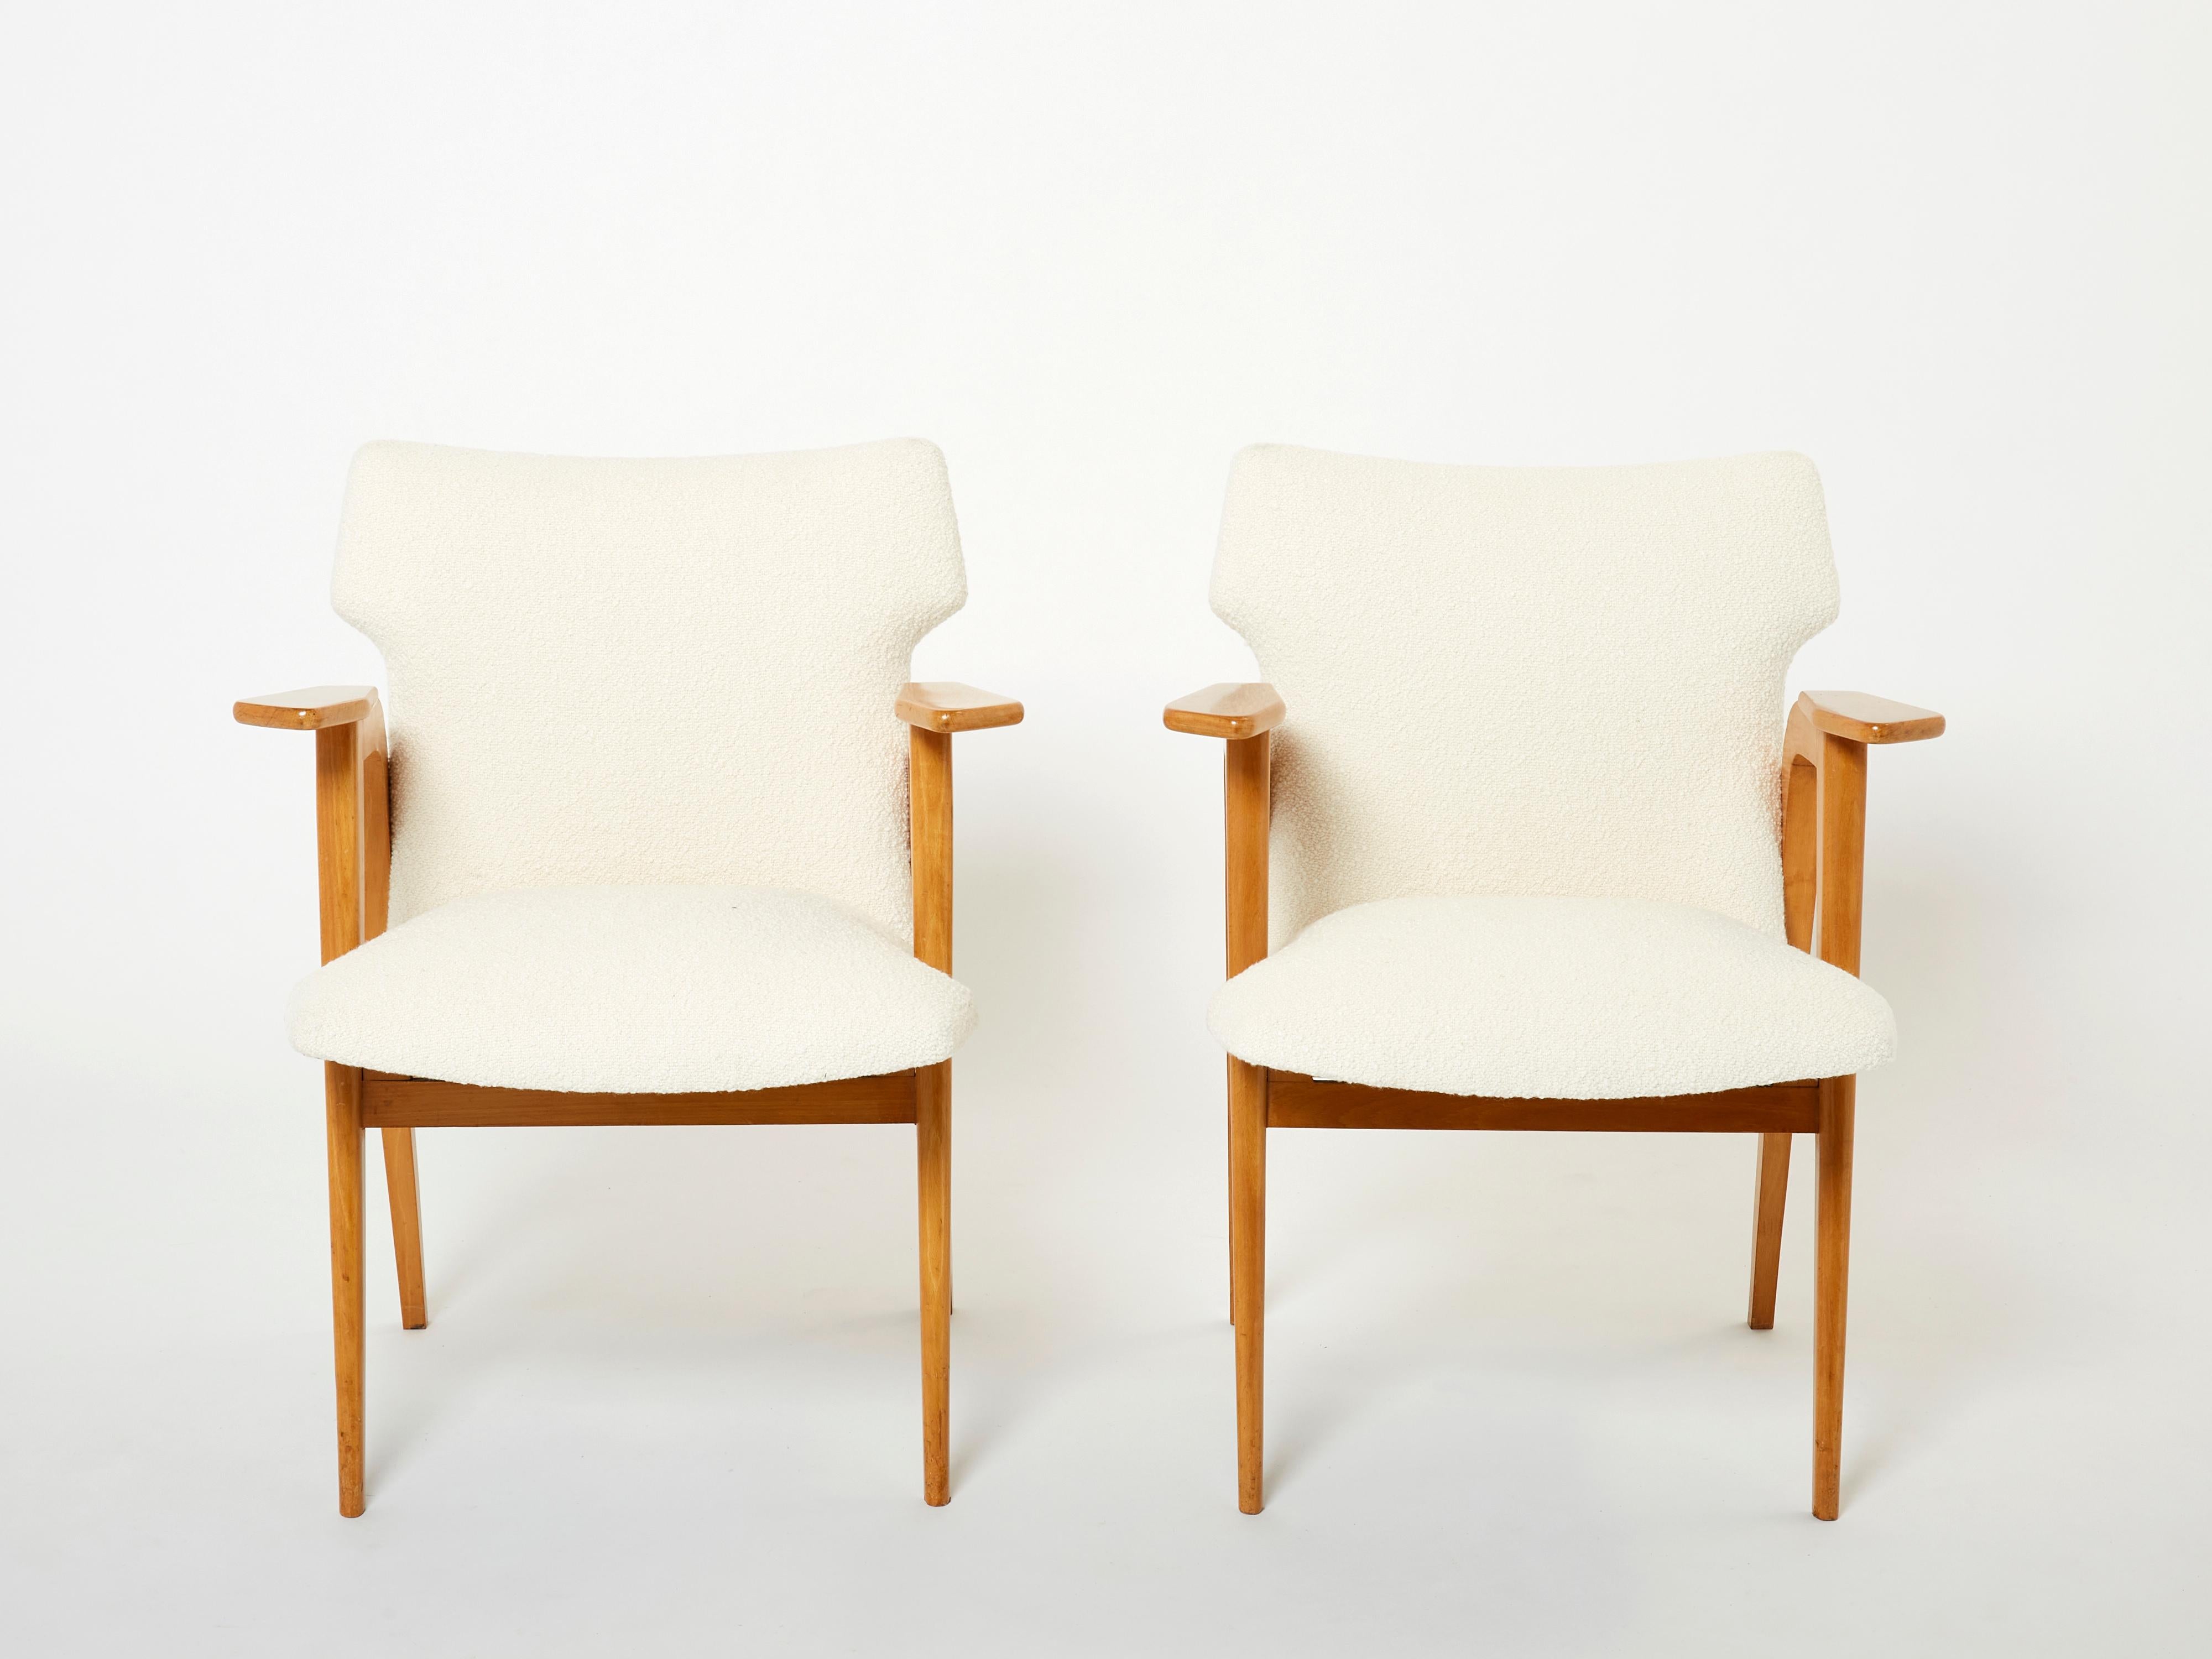 These elegant compass armchairs are sure to add an element of modernism chic to any room in your home. Designed by Roger Landault in the late 1950s, with shapely solid oak frames, these armchairs are wonderful examples of mid-century french